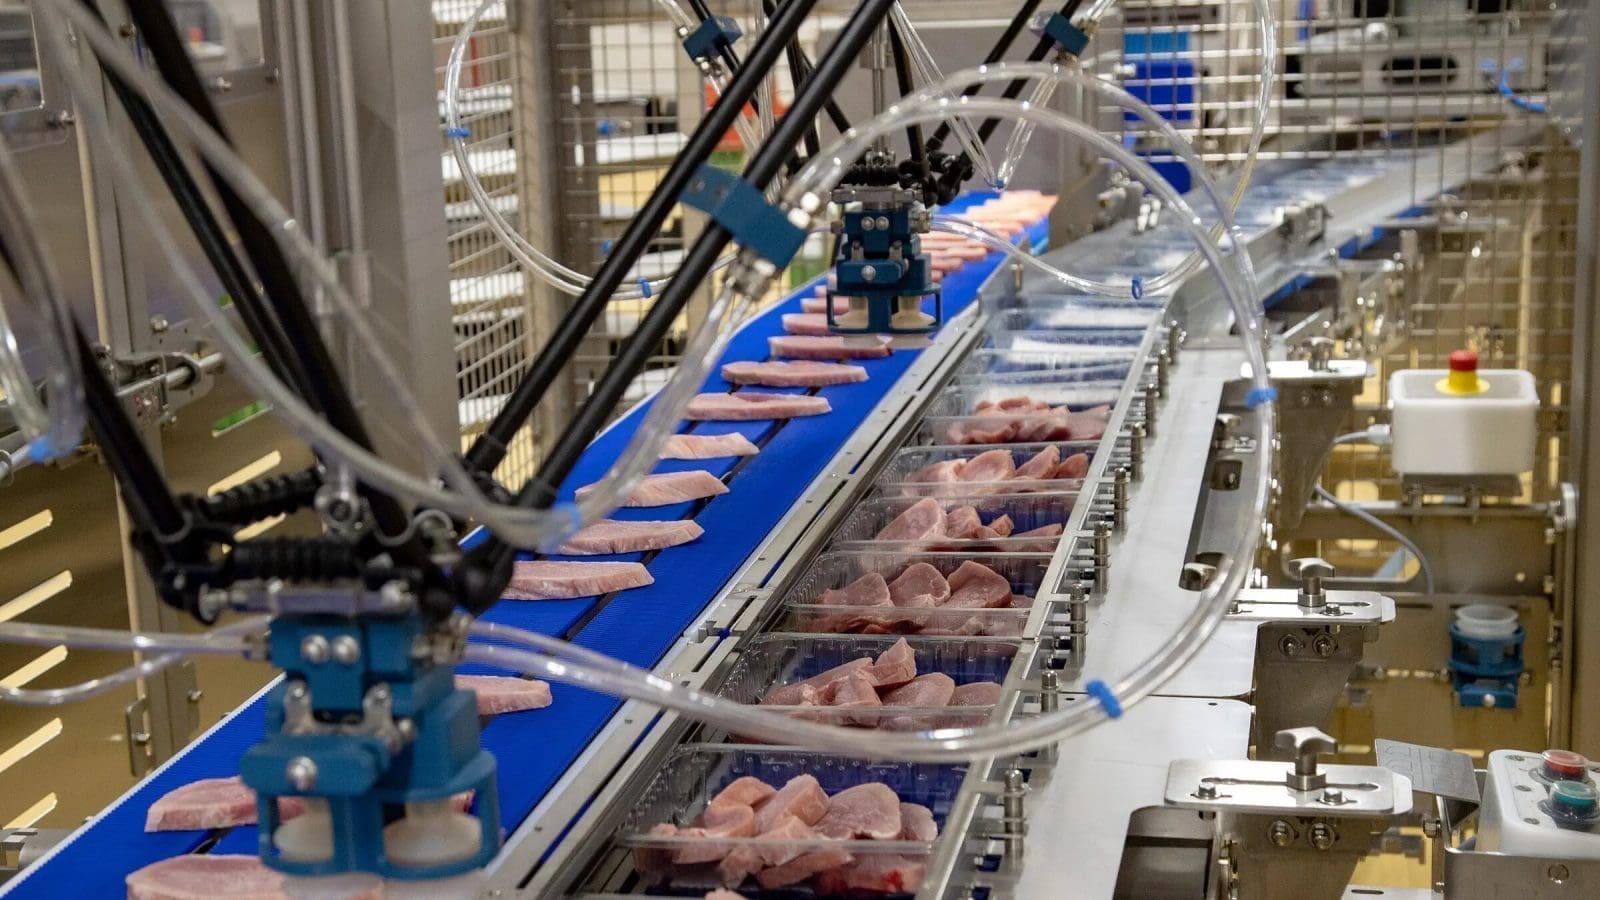 Dutch meat processor Vion Food Group plans to close its plant in Germany